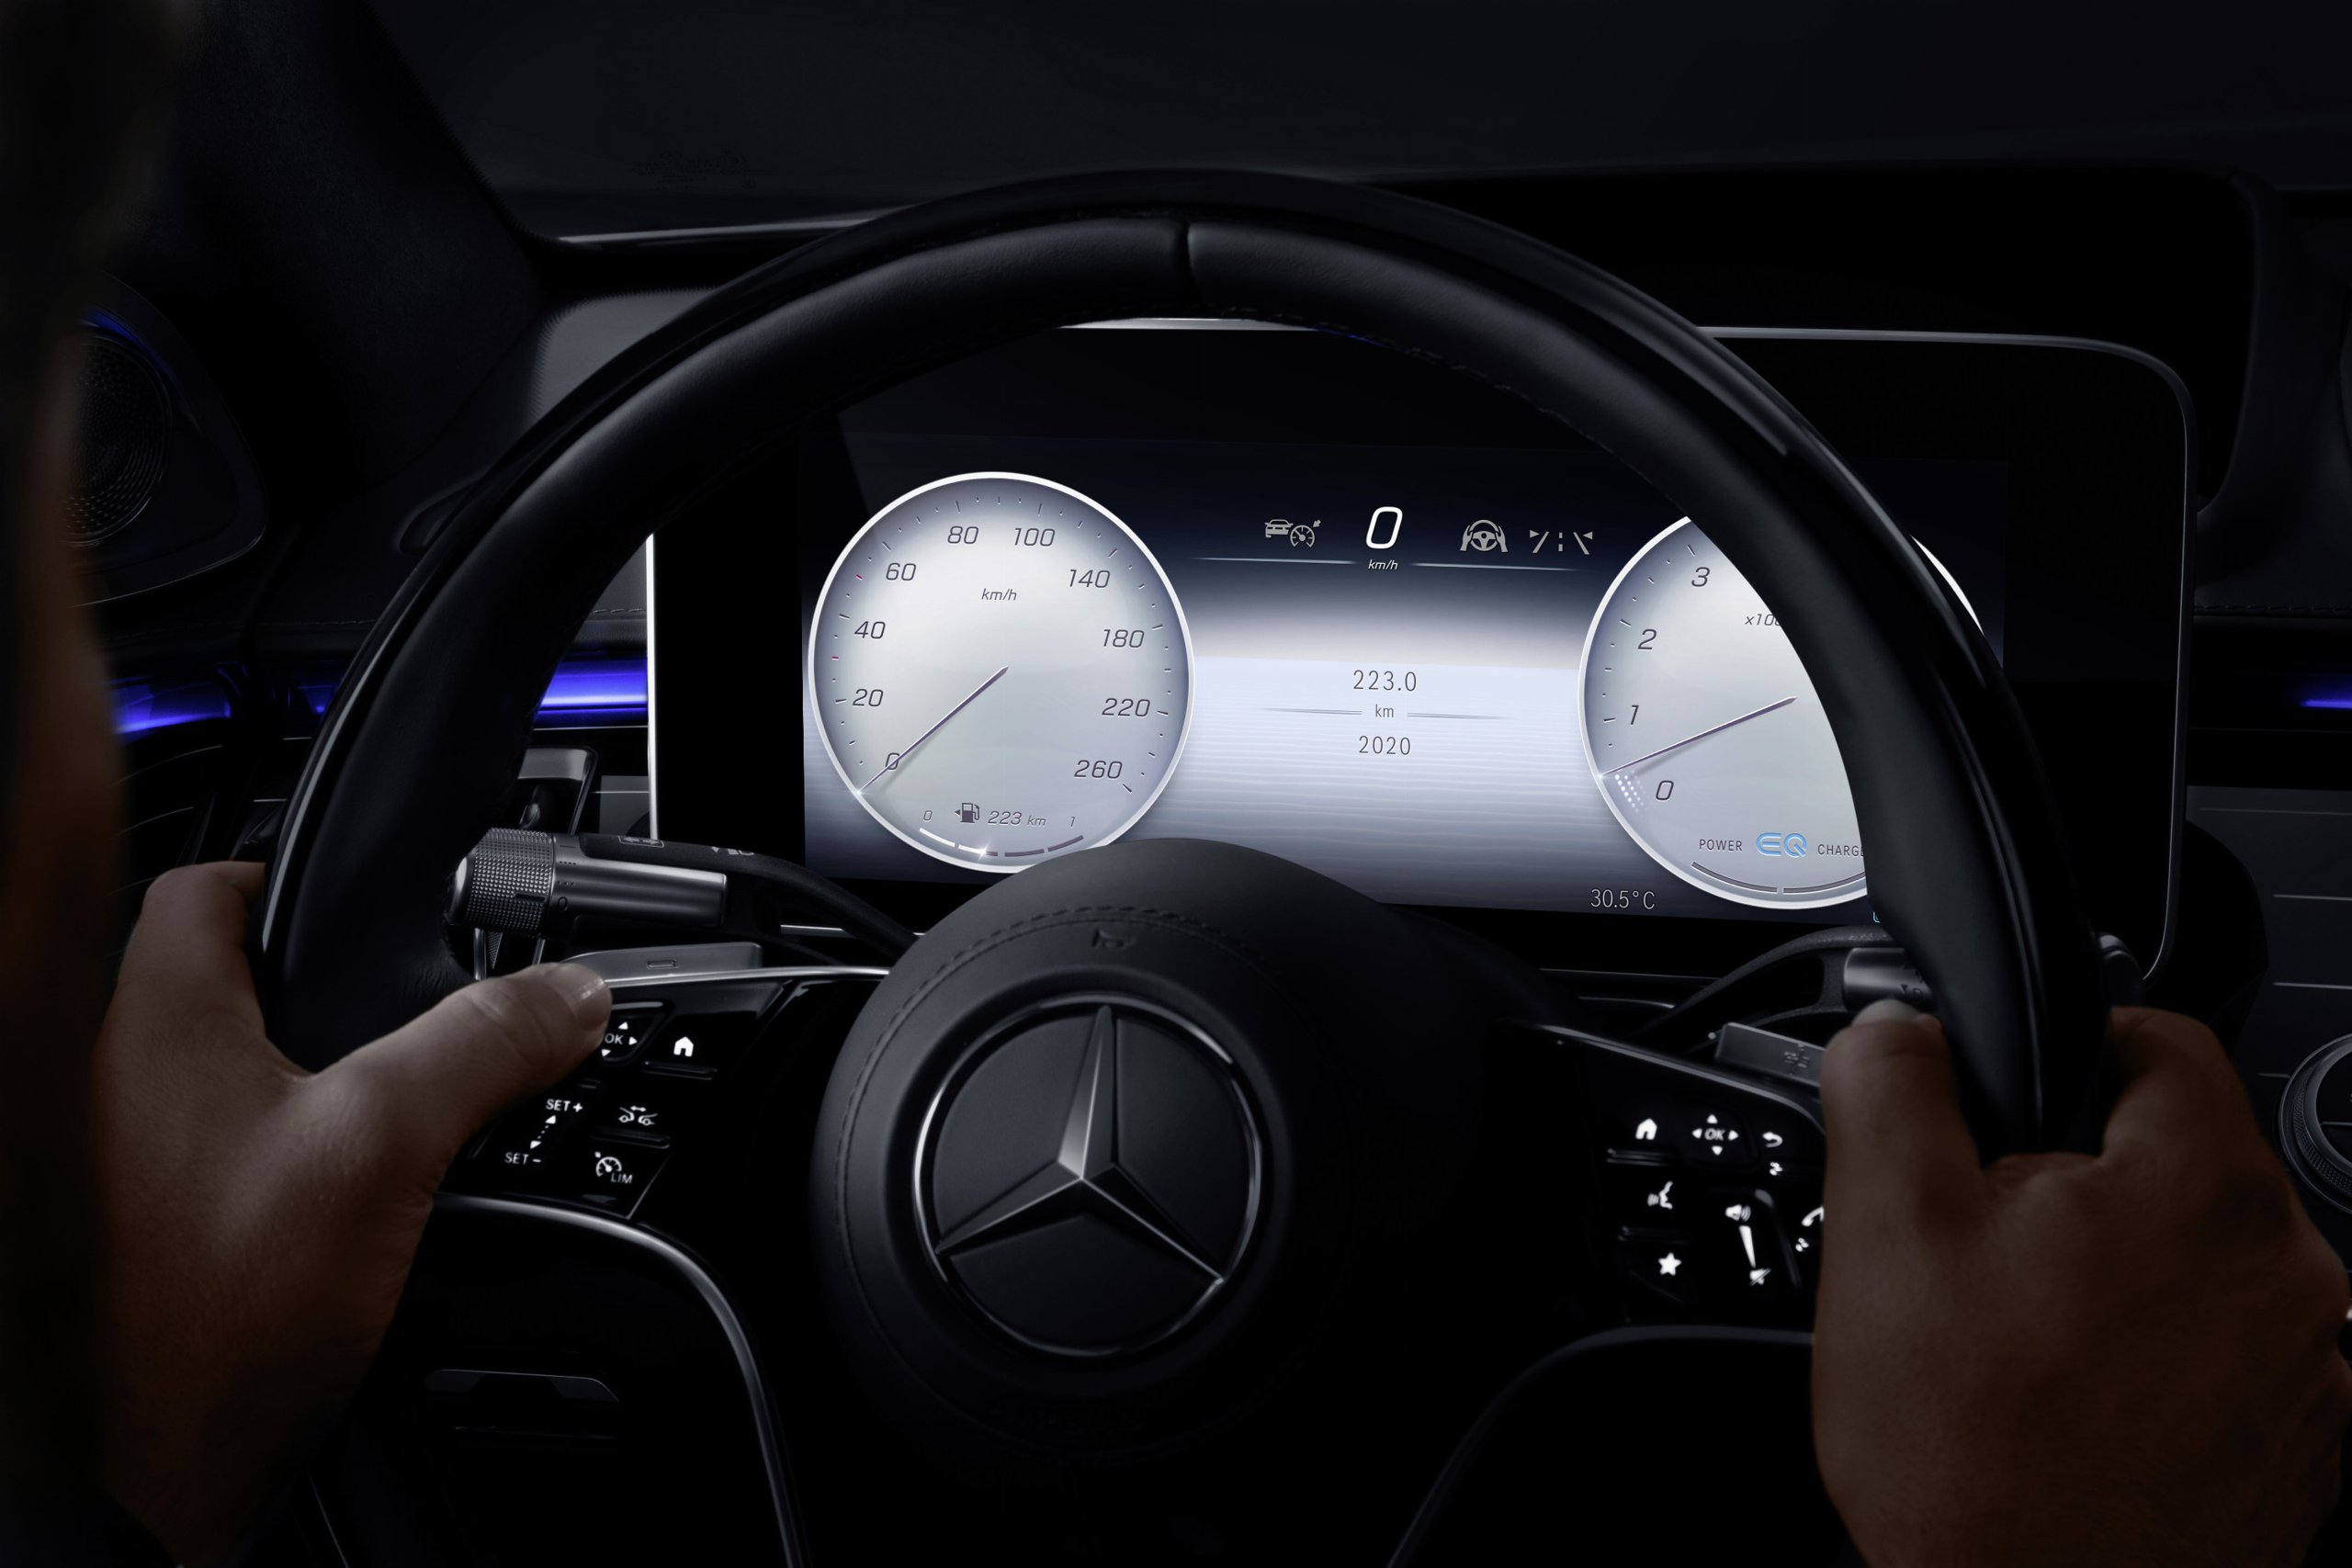 Post Banner for MBUX mk2 to Launch with the New S-Class: MB Previews A Host of Technologies to Enrich the Infotainment Experience on the W223